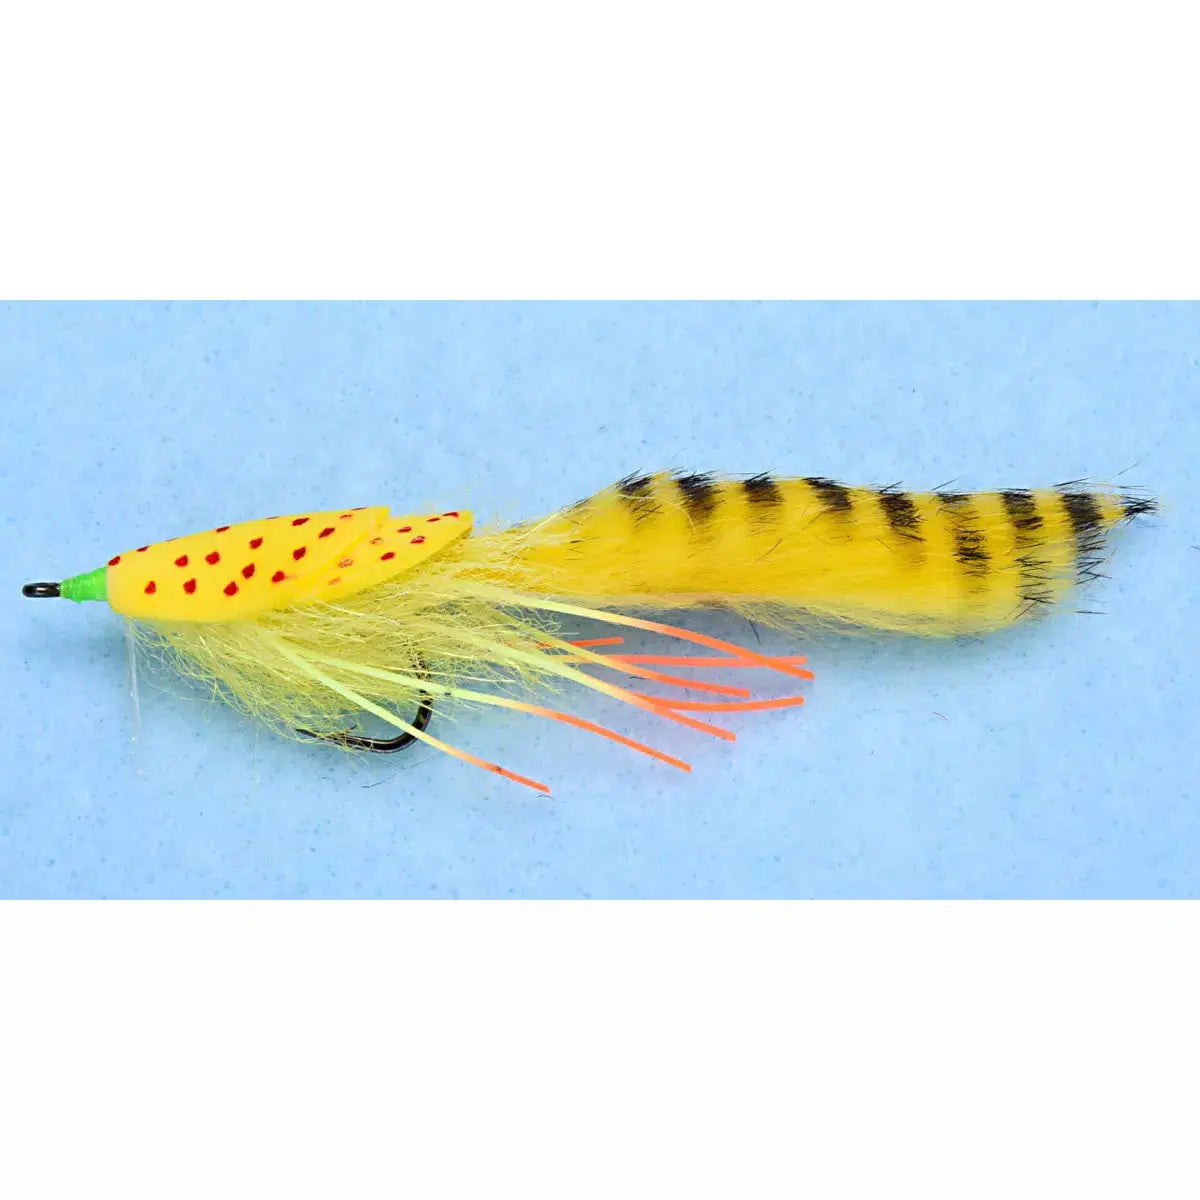 Enrico Puglisi Diver Fly-Lure - Saltwater Fly-Enrico Puglisi-Yellow-Size #1/0-Fishing Station